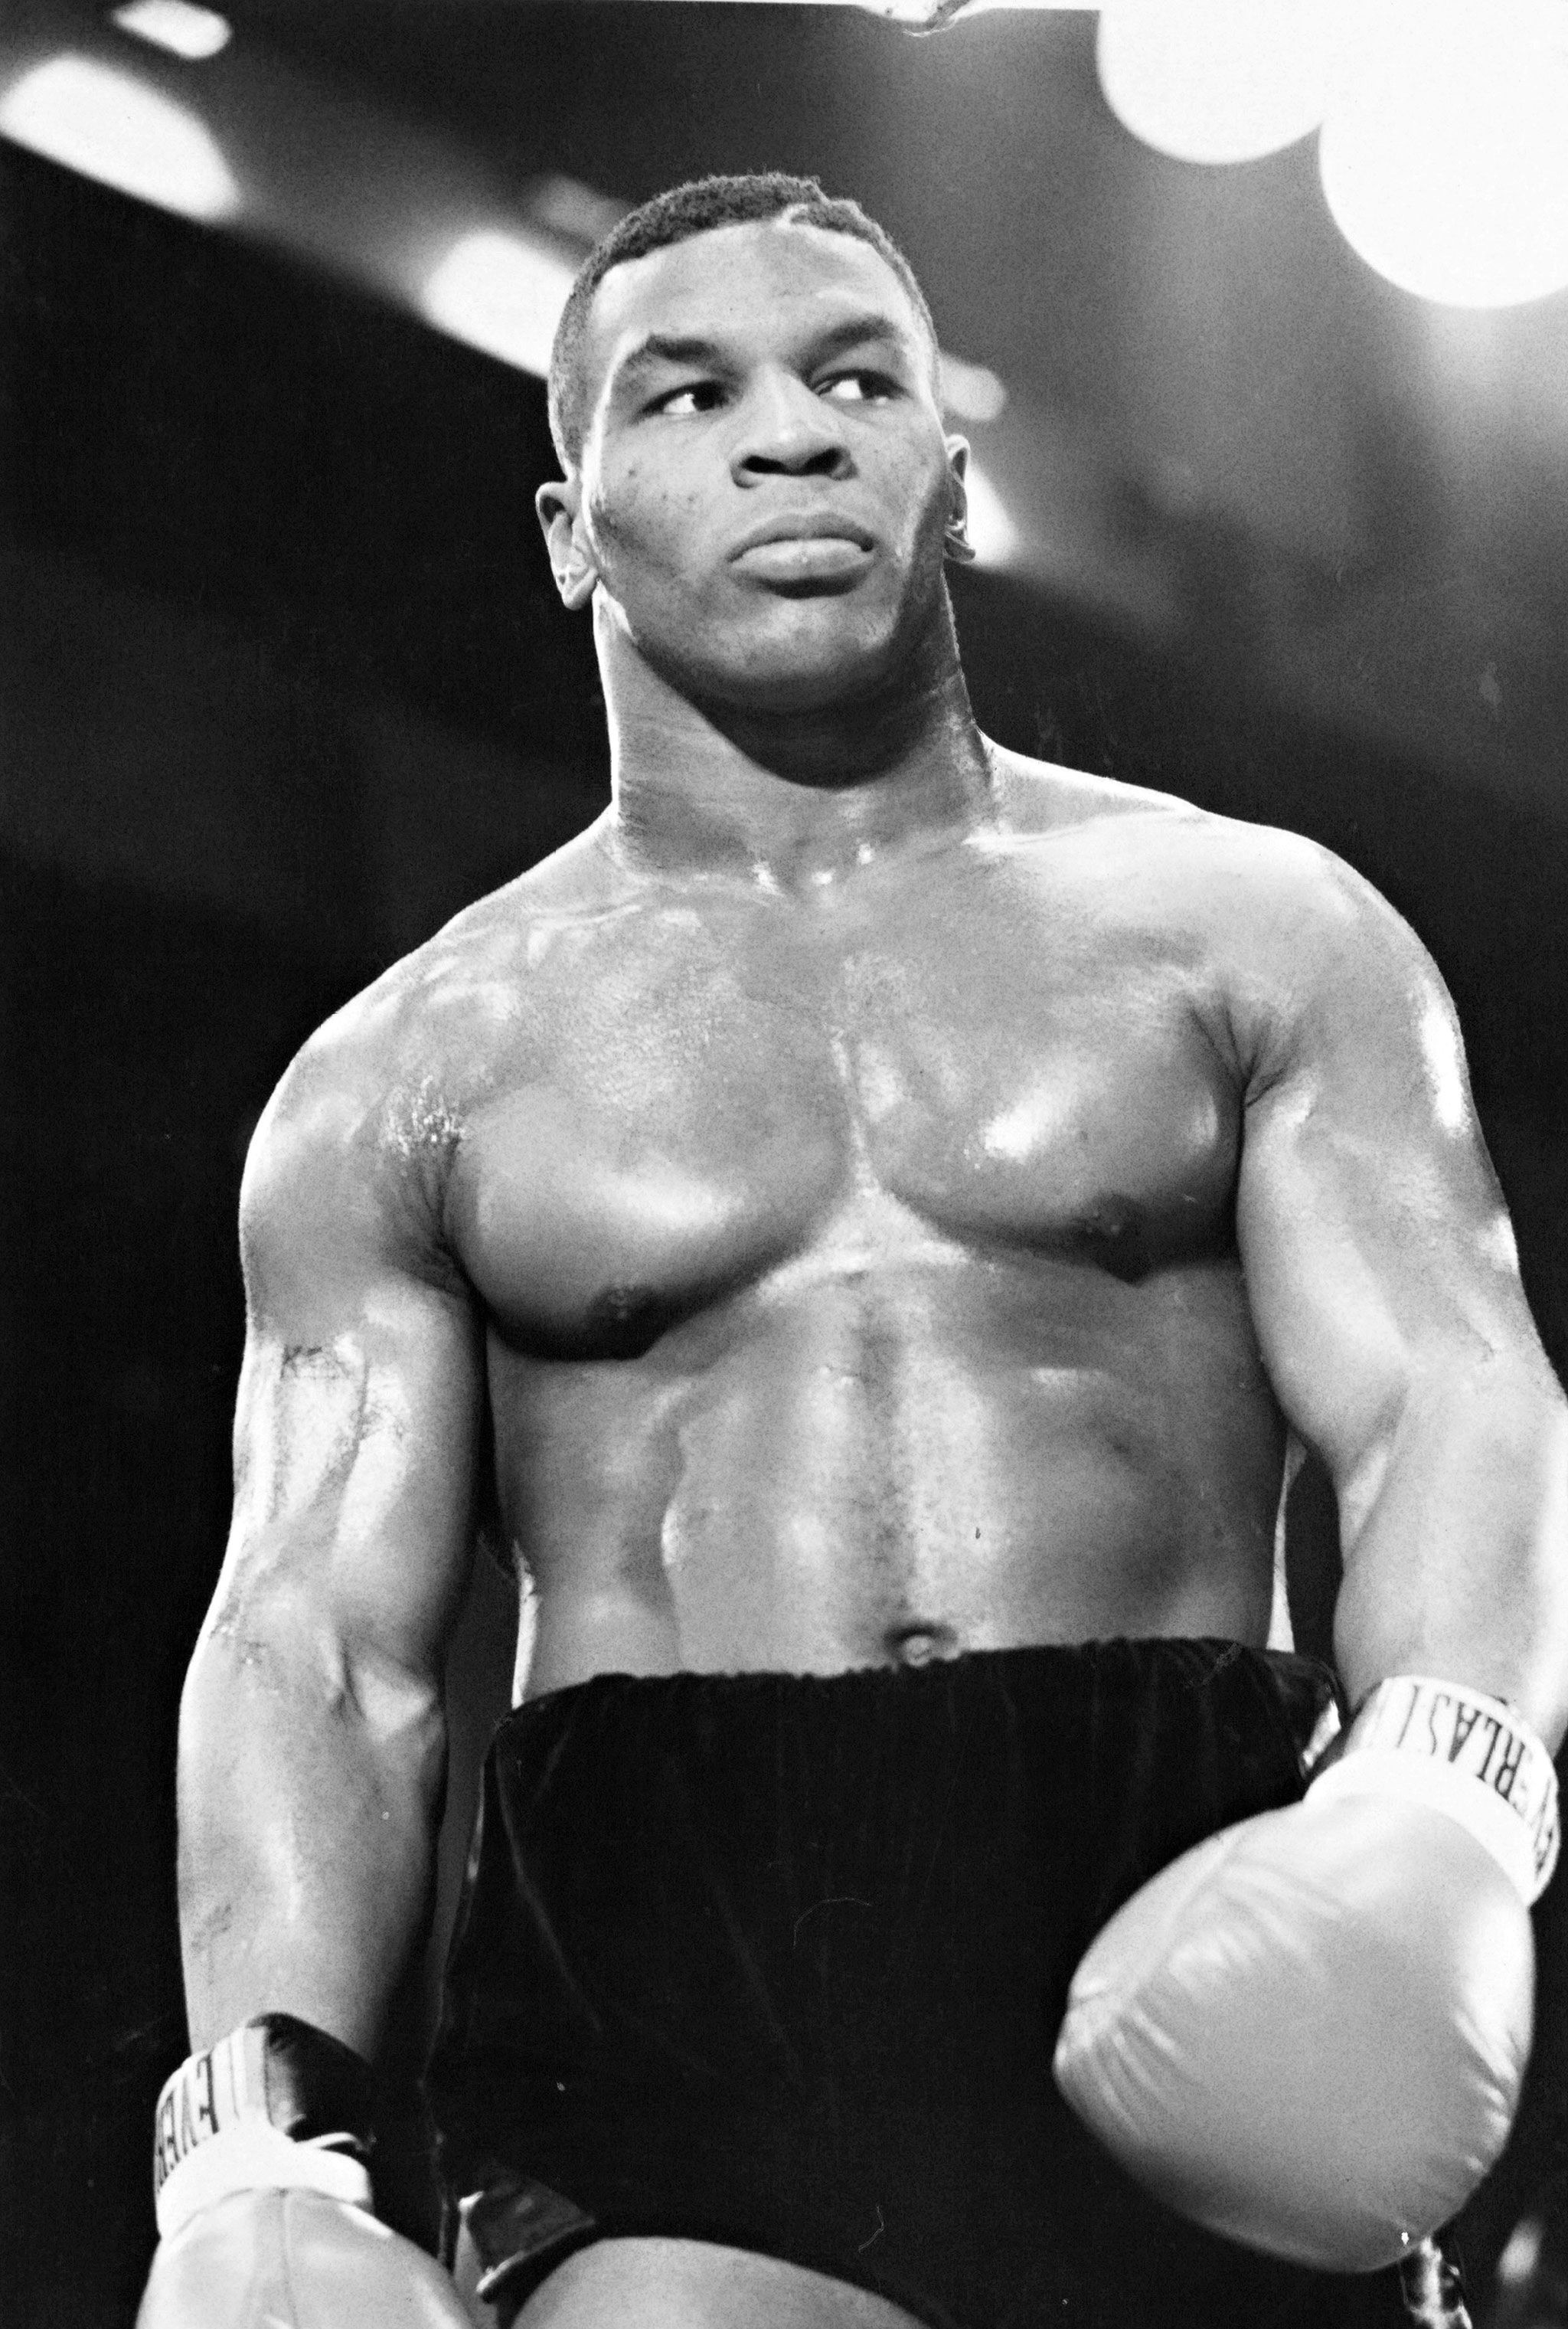 mike tyson iphone wallpaper,bodybuilder,barechested,muscle,professional boxer,bodybuilding